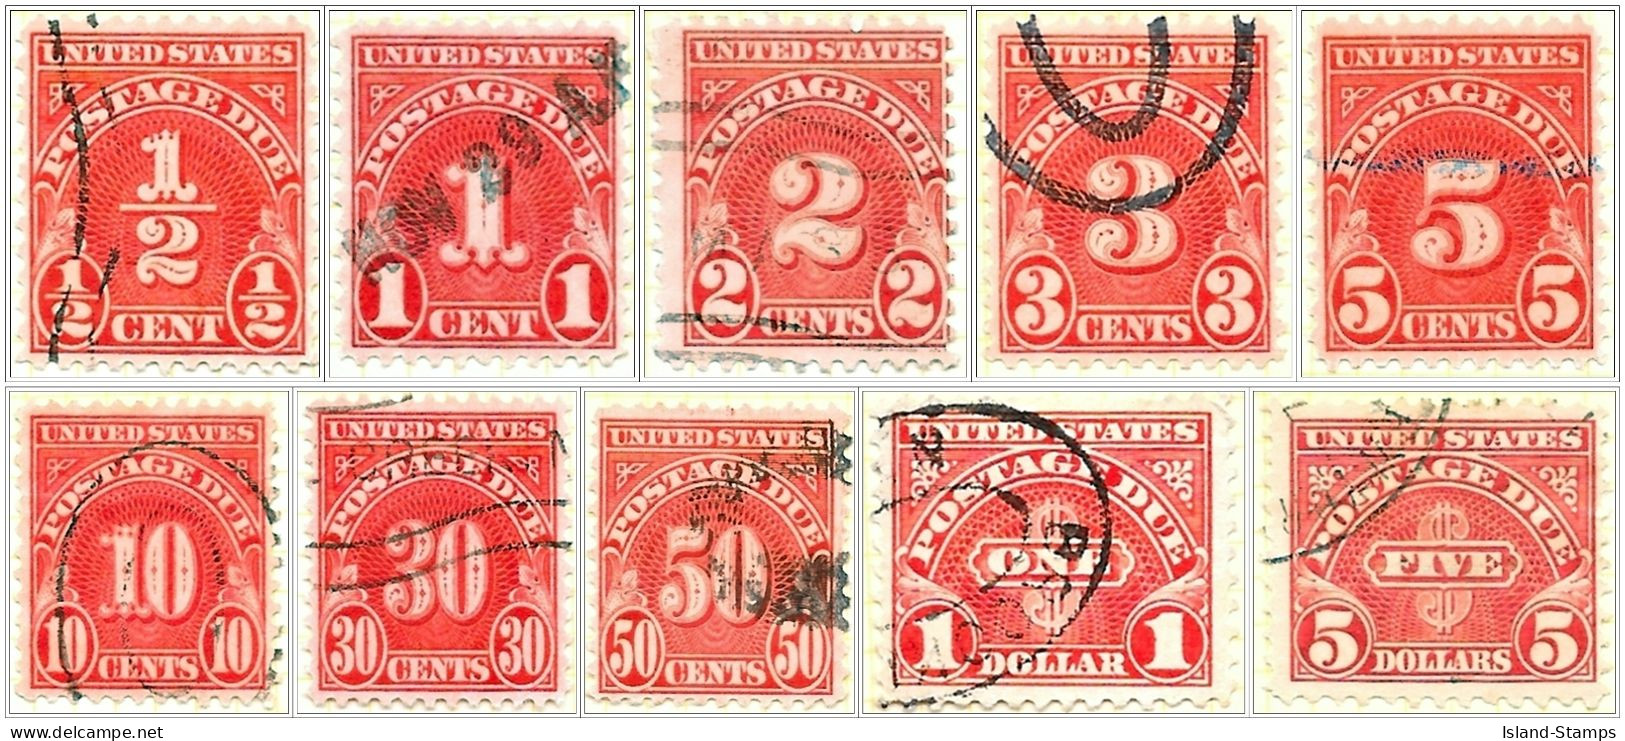 USA 1930 Full Set Of Ten Postage Dues Used - Oblitérés